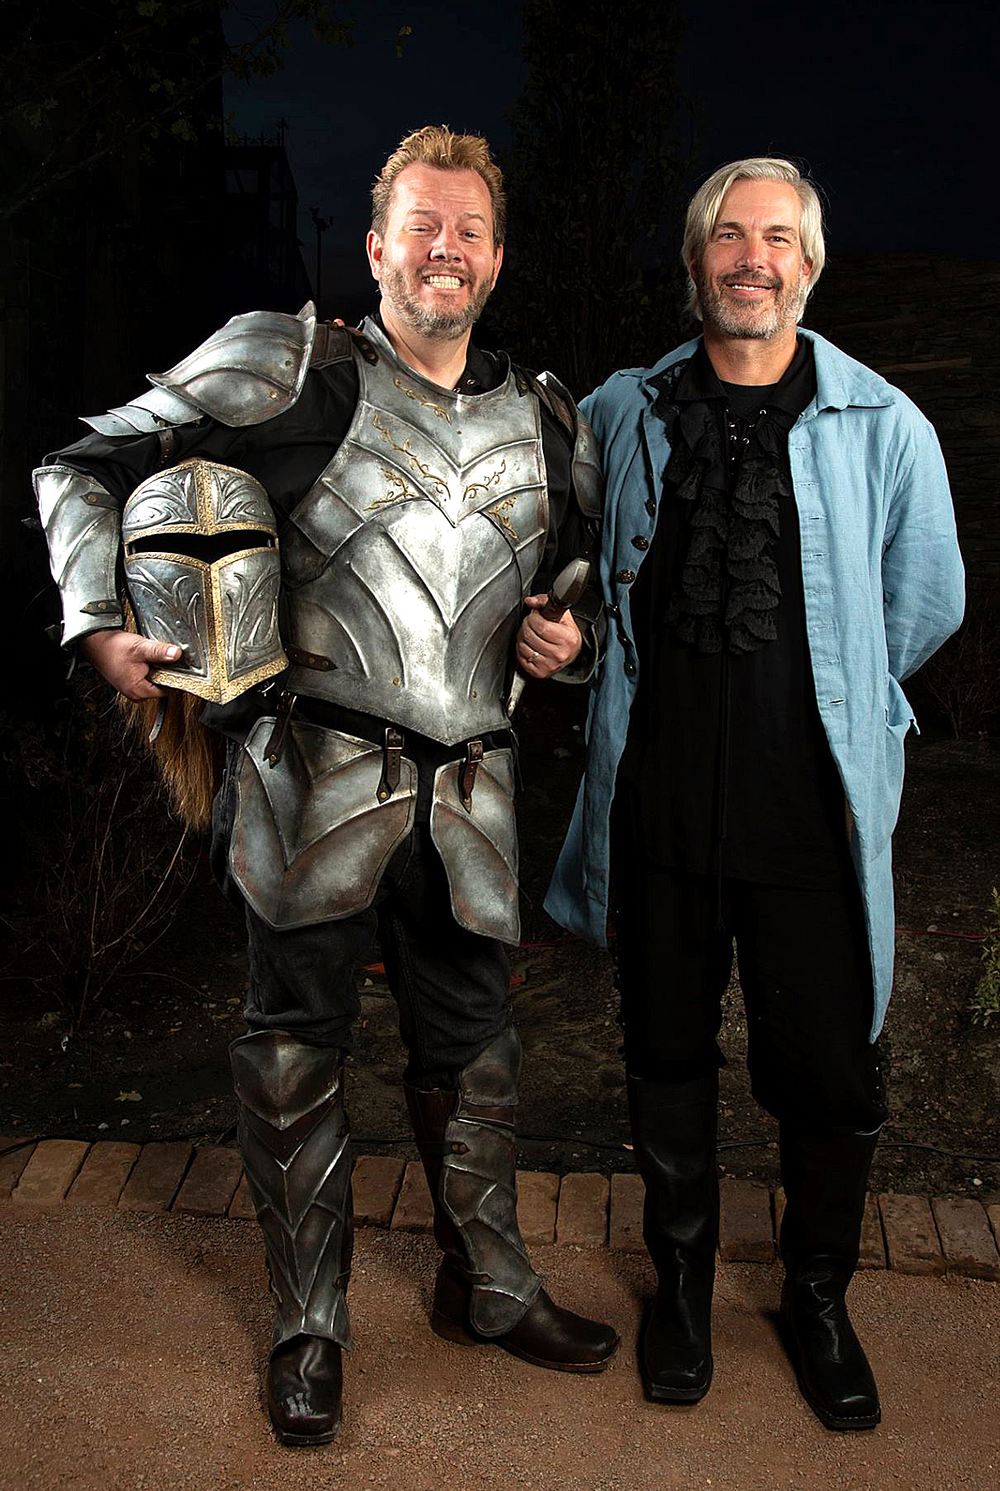 Josh Shipley (left) and Ken Bretschneider (right) worked together to bring the fantasy world of Evermore to life